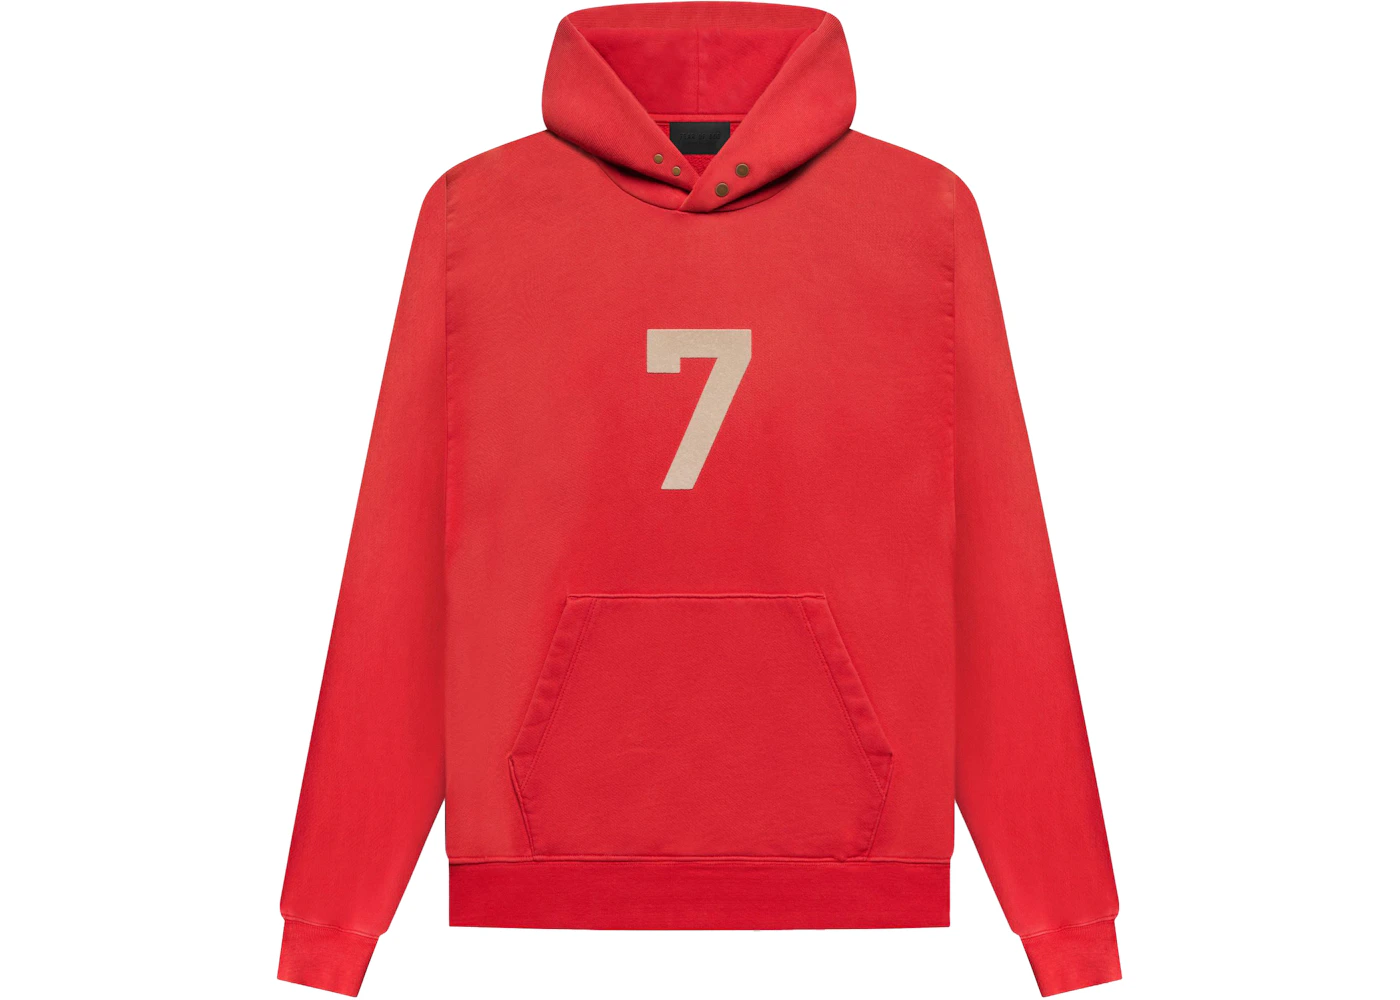 Fear of God Seventh Collection 7 Hoodie Vintage Red Men's